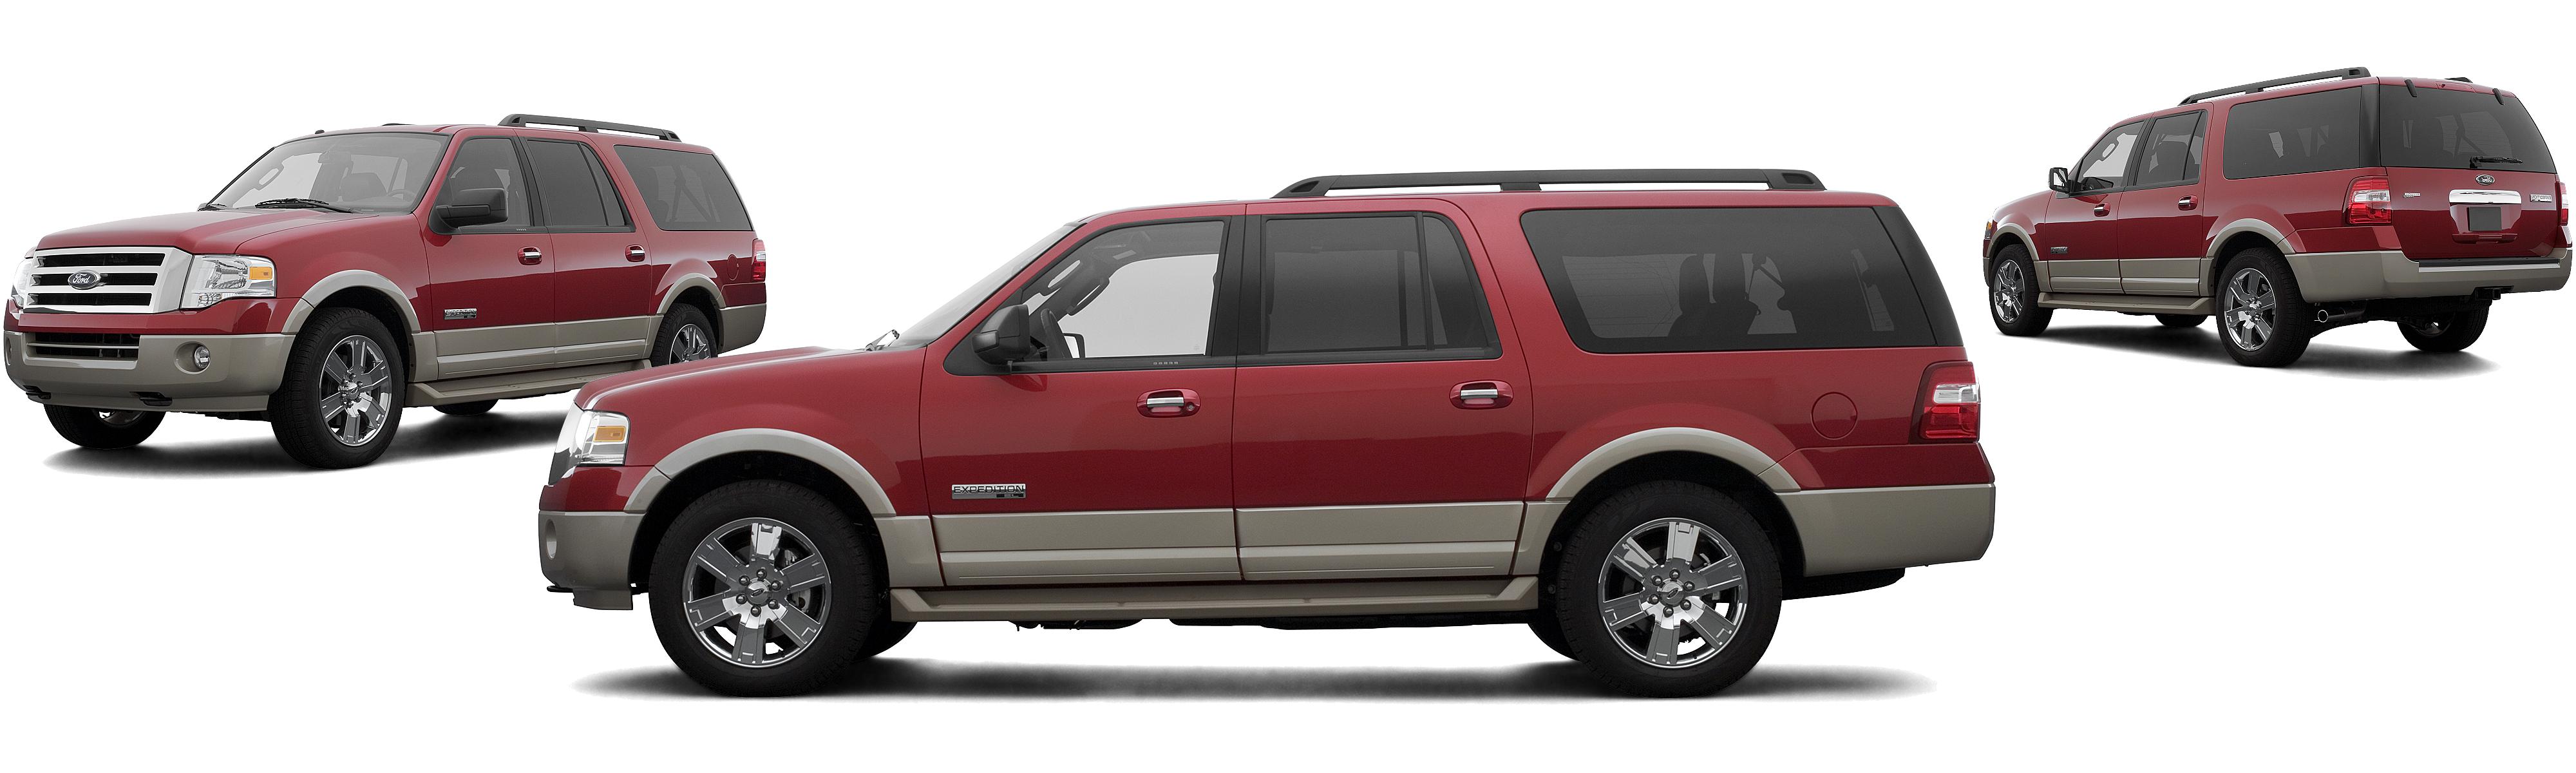 2007 Ford Expedition EL Eddie Bauer 4dr SUV - Research - GrooveCar